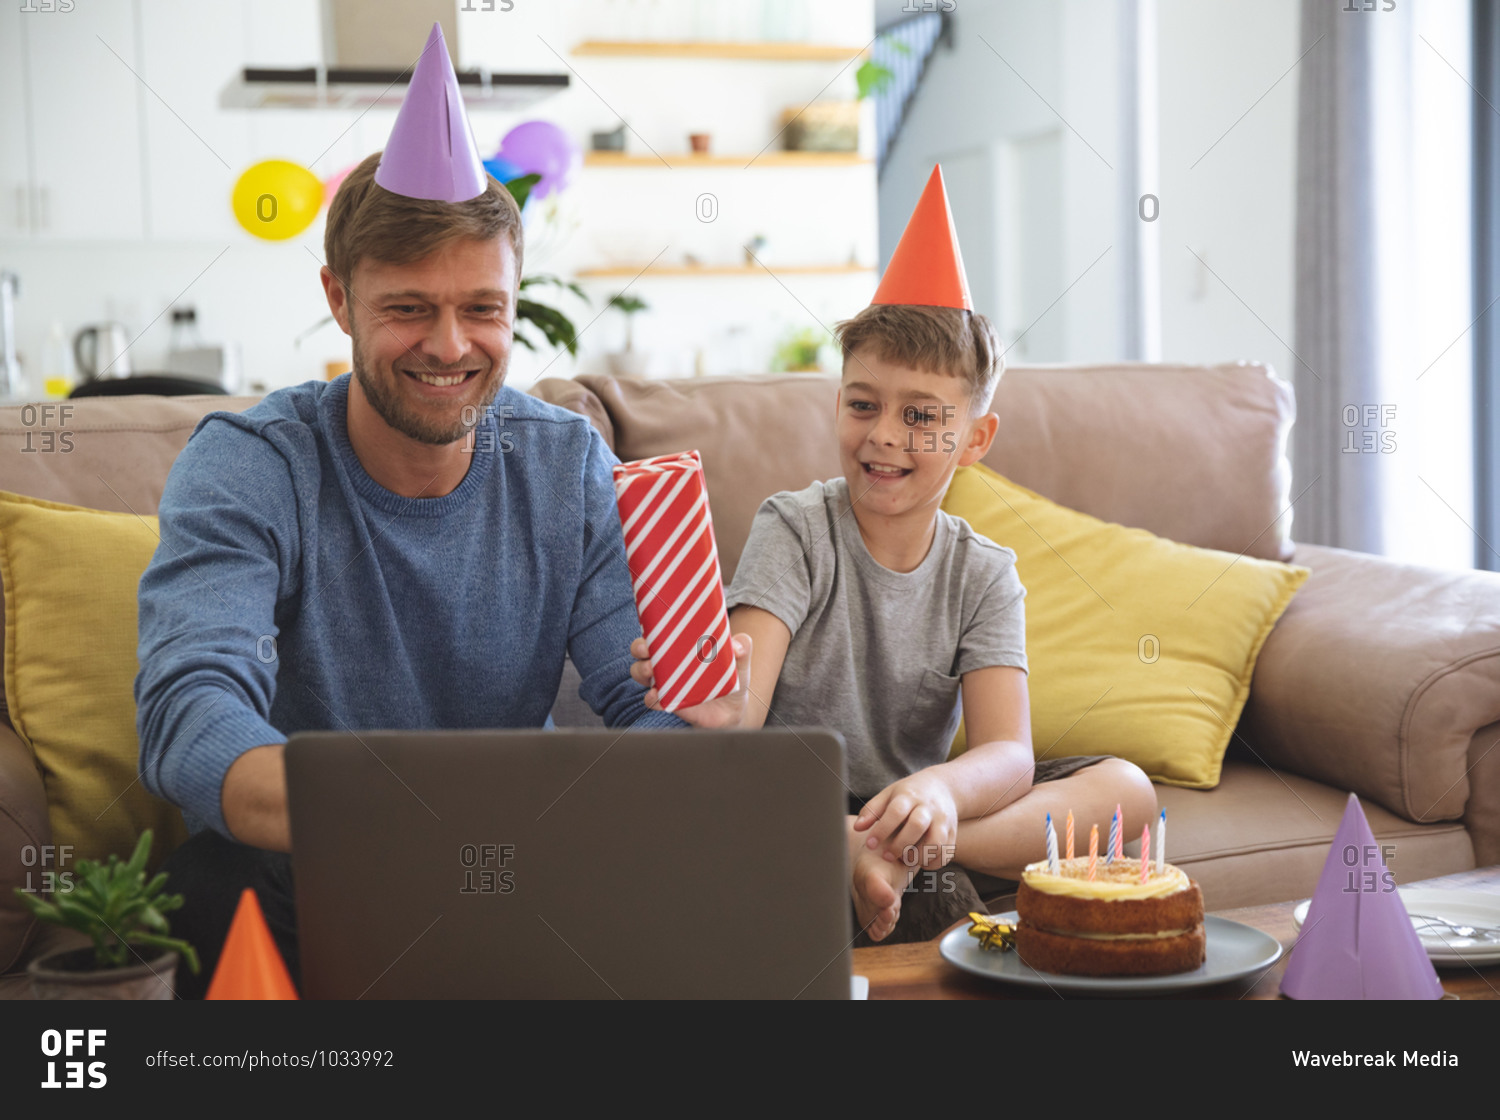 Caucasian man spending time at home with his son together, having birthday party using laptop computer for video chat. Social distancing during Covid 19 Coronavirus quarantine lockdown.